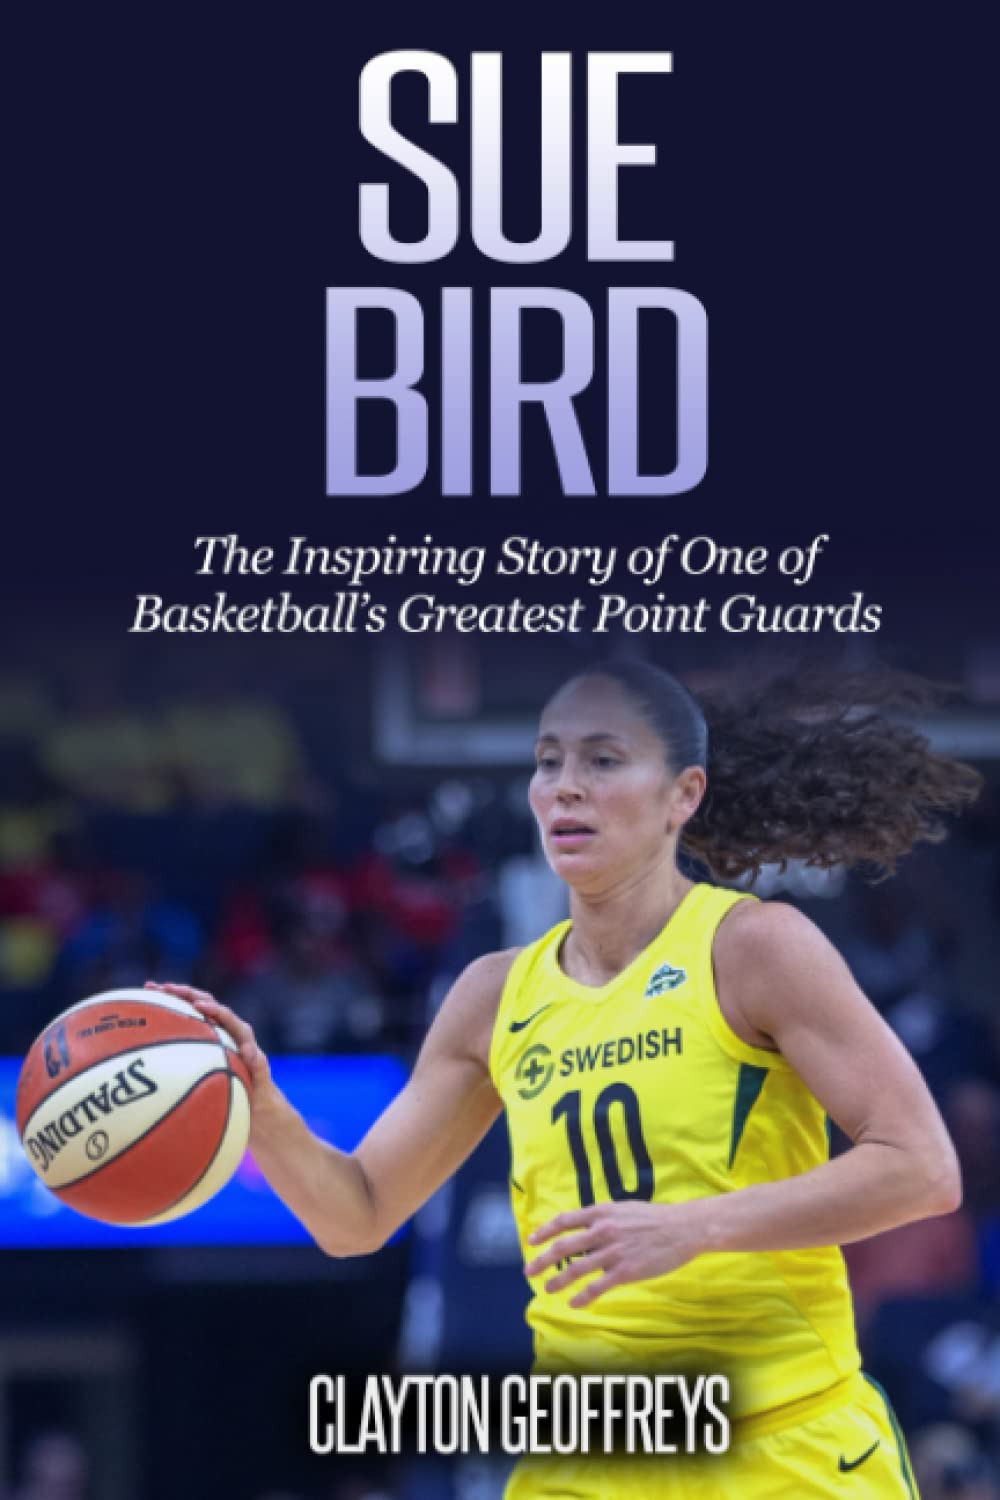 Sue Bird: The Inspiring Story of One of Basketball’s Greatest Point Guards (Women's Basketball Biography Books)